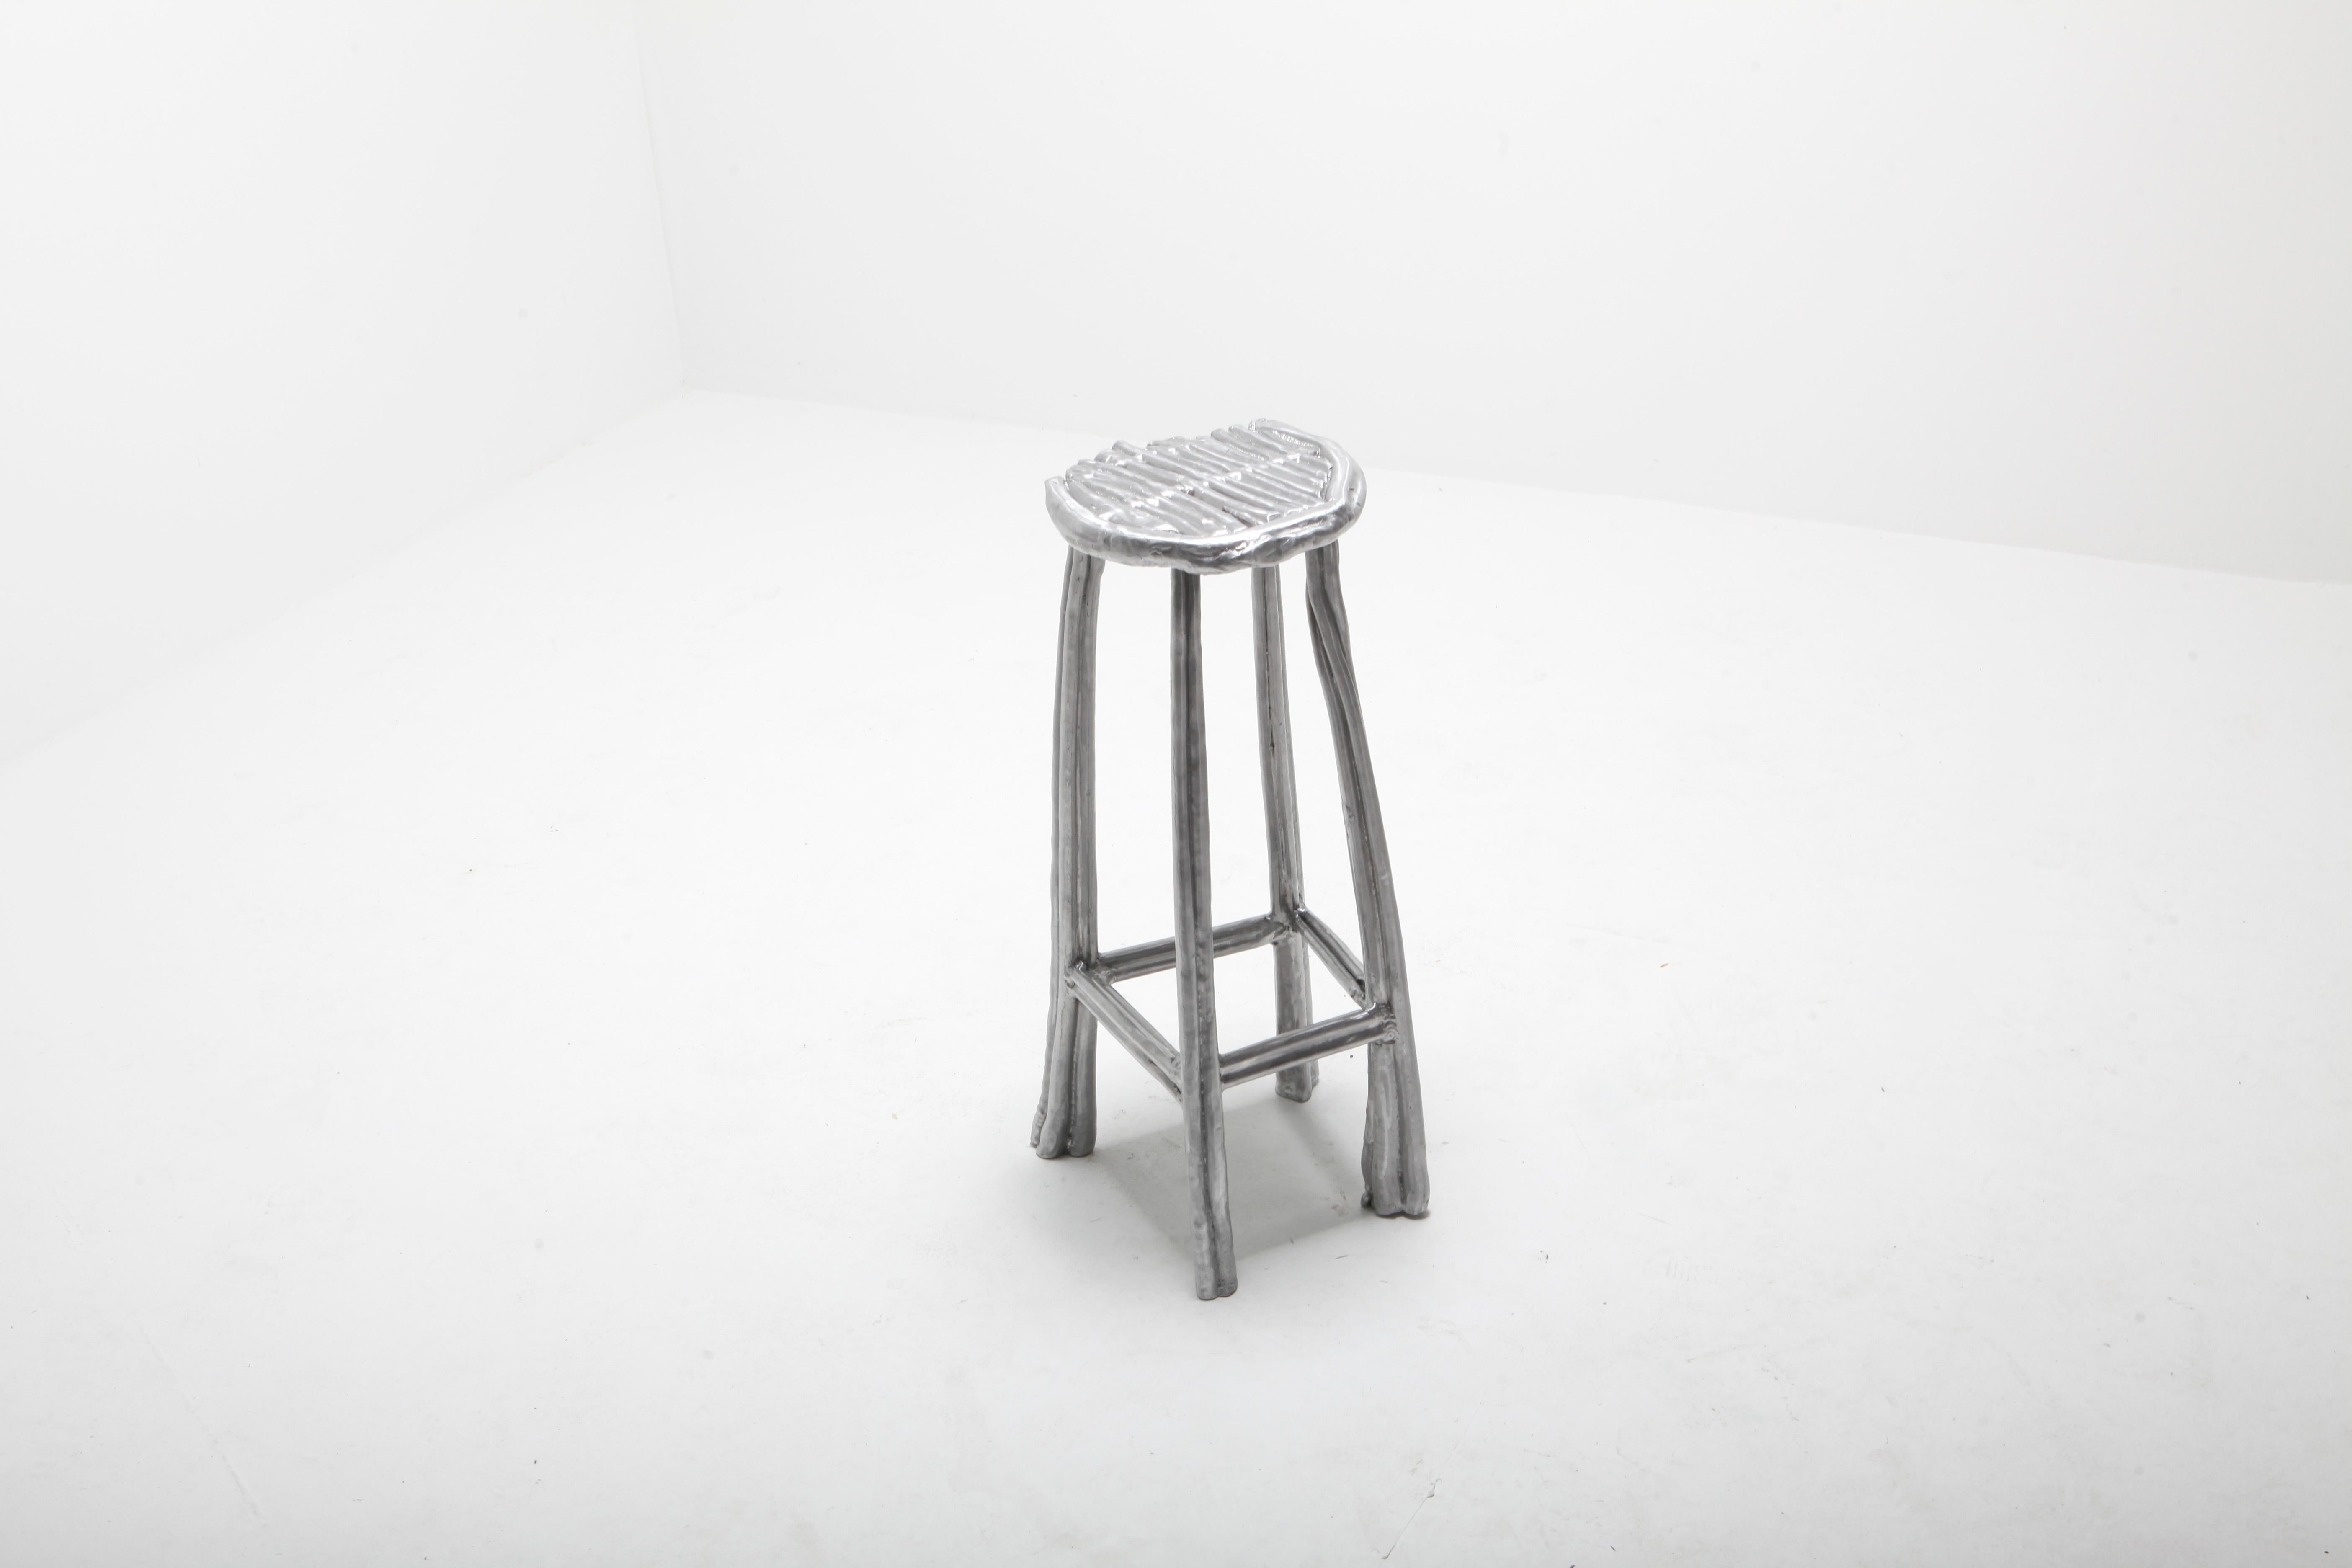 Unique bar stool T-009 by Studio Nicolas Erauw.
Piece unique 1 of 1
Dimensions: H 70 CM x Ø 33 CM
Materials: Aluminum, wax dipped
13 kg

Part of the on-going ‘Wax on/Wax off series’. These series are a collection of experiments of lost-wax